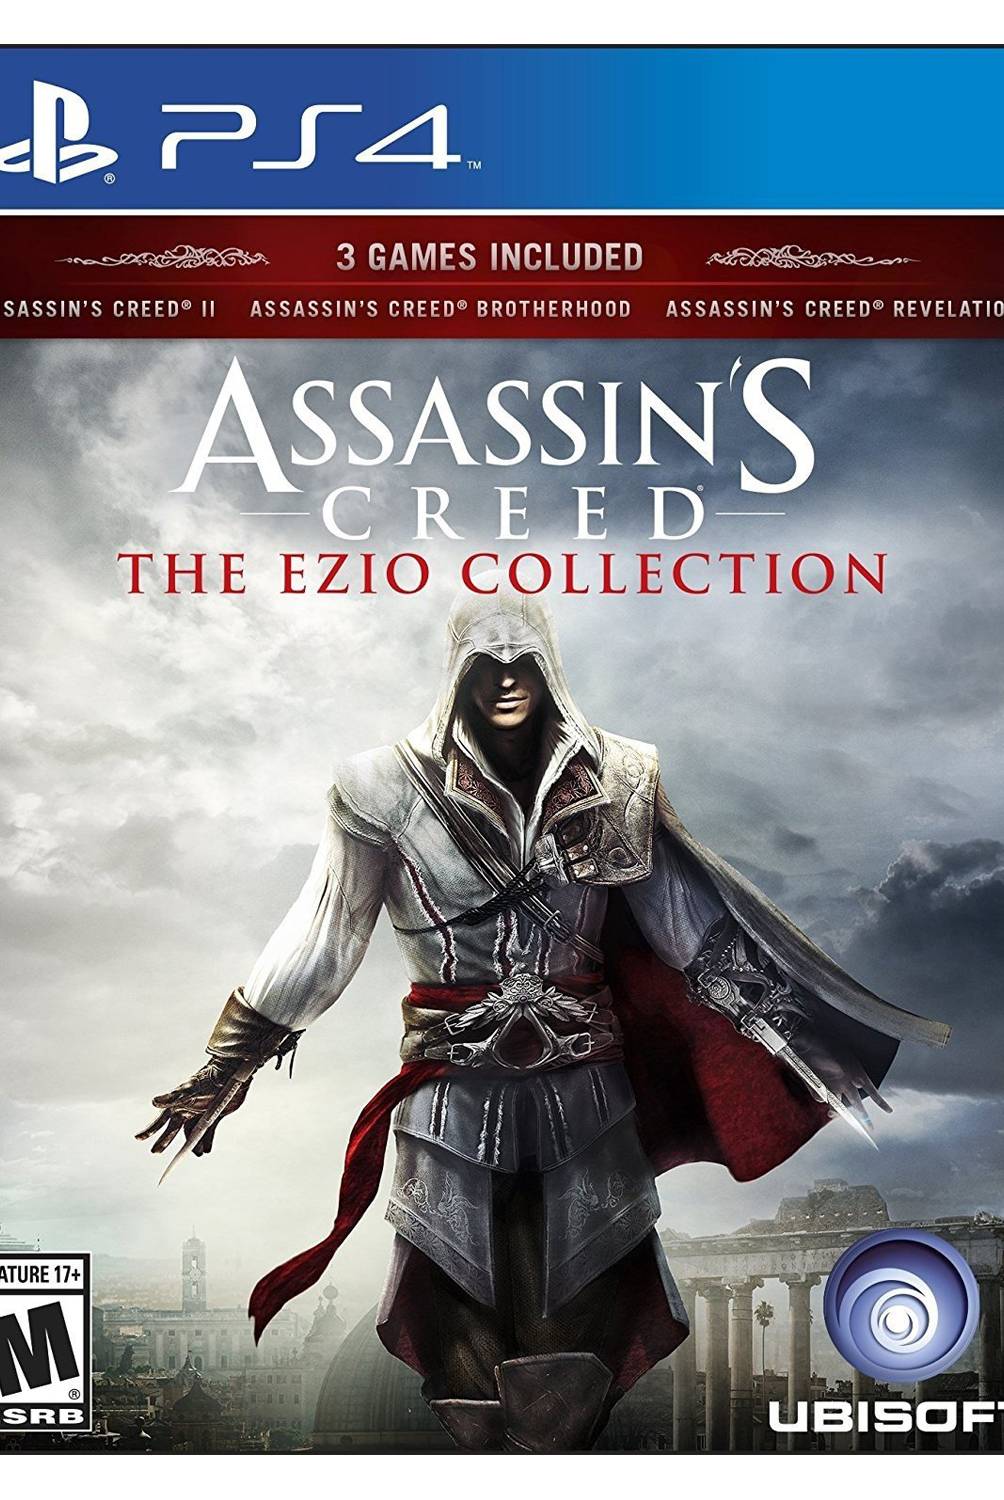 PLAYSTATION - ASSASSINS CREED EZIO COLLECTION - PS4.